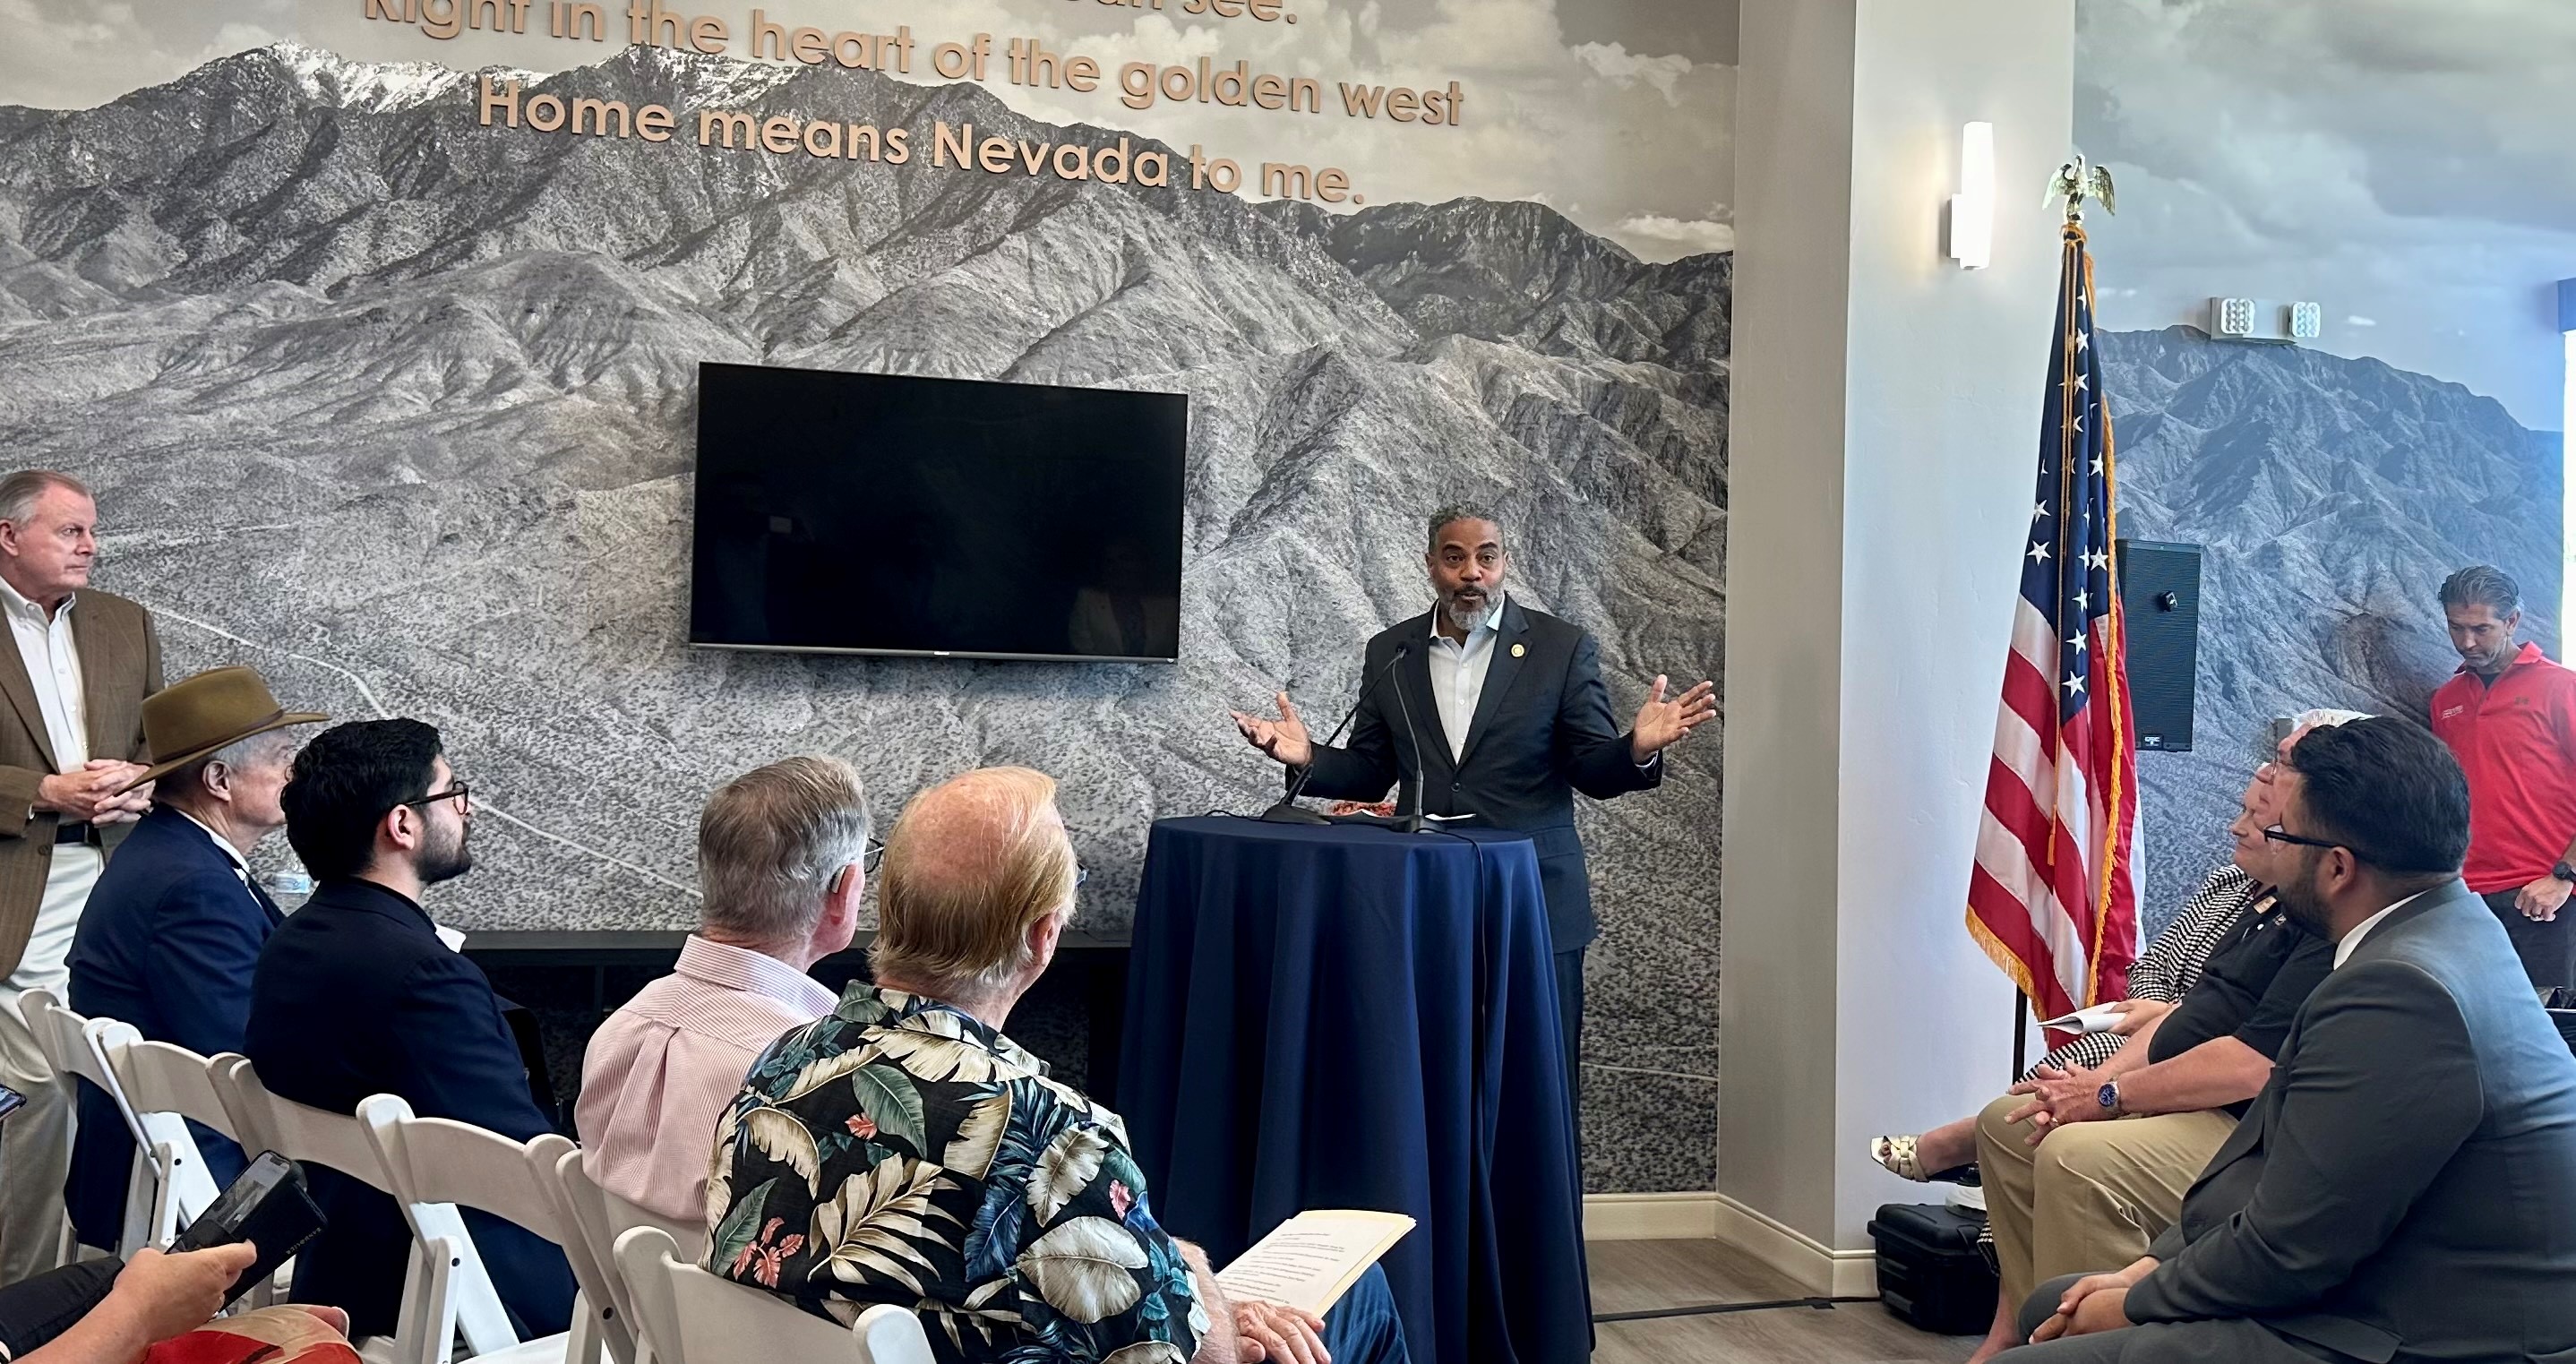 Rep. Horsford joins FHLBank San Francisco and Nevada Rural Housing Authority at grand opening event for Hafen Village AHP in Mesquite, NV